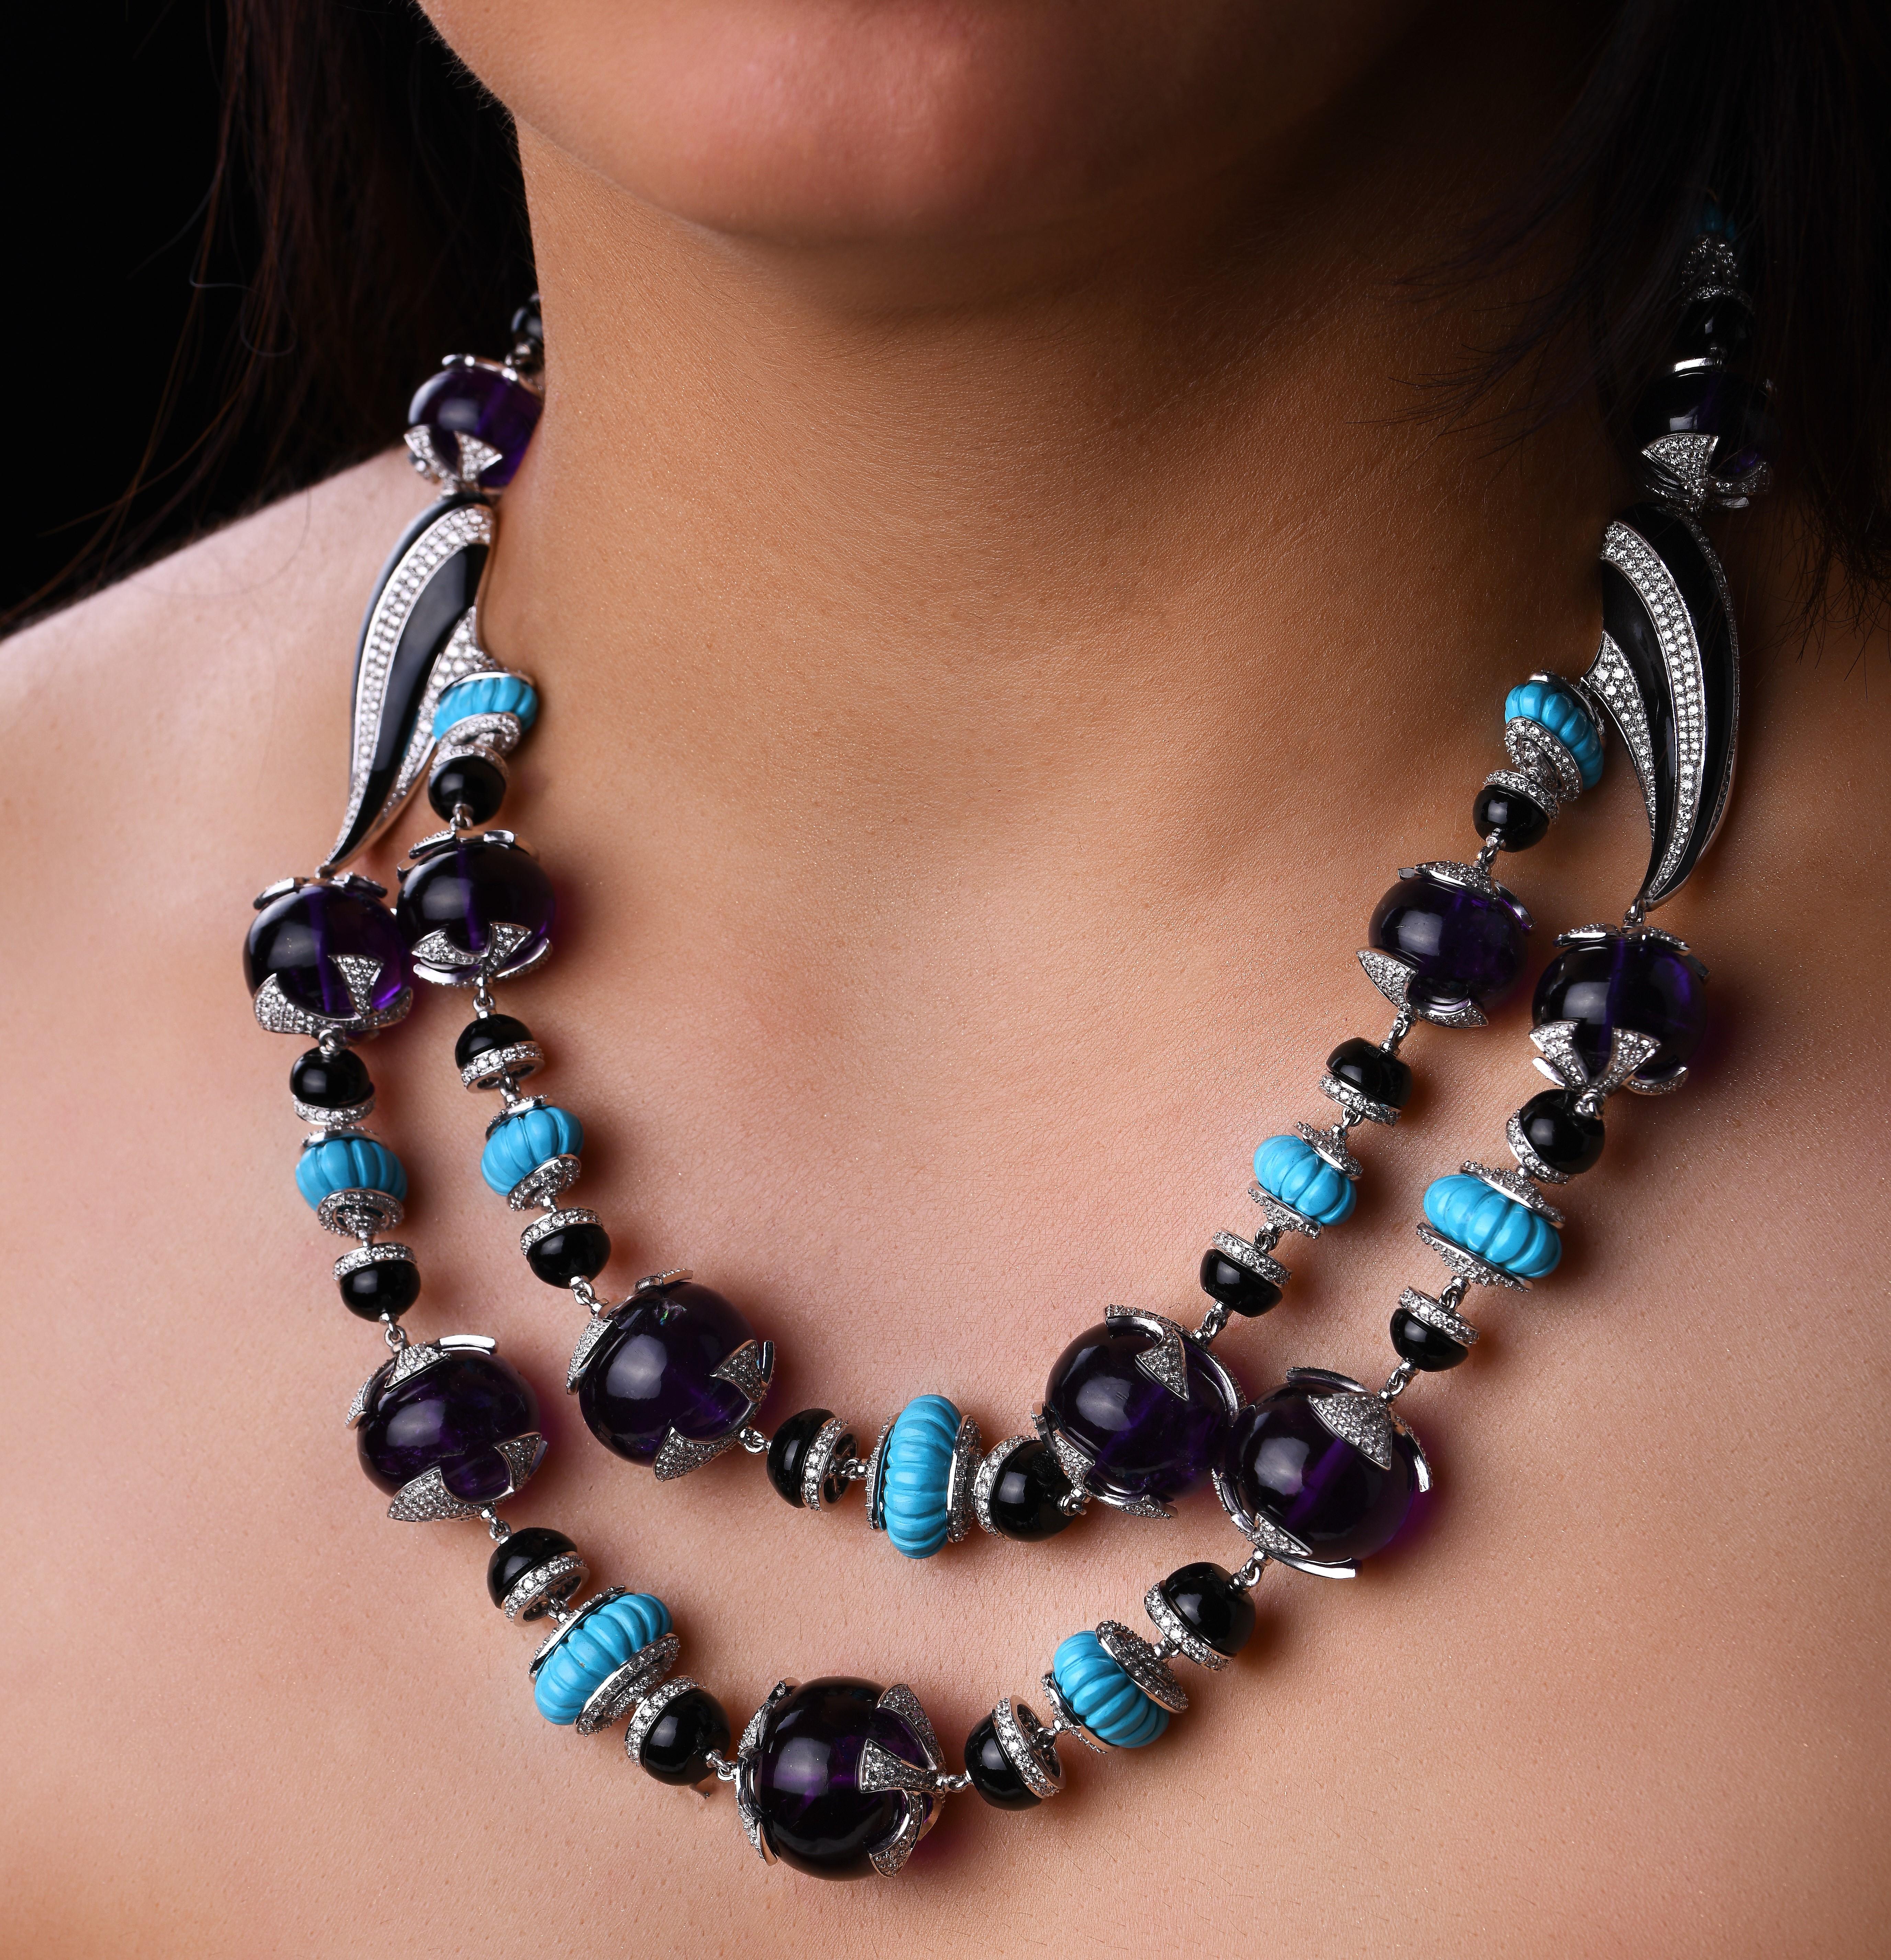 A stunning exotic 2 line necklace in amethyst, carved turquoise & black enamel with diamonds. Comprising 13 gorgeous Amethyst large beads capped with diamond pave petals, alternating with carved turquoise pumpkin beads. Both the gemstones are